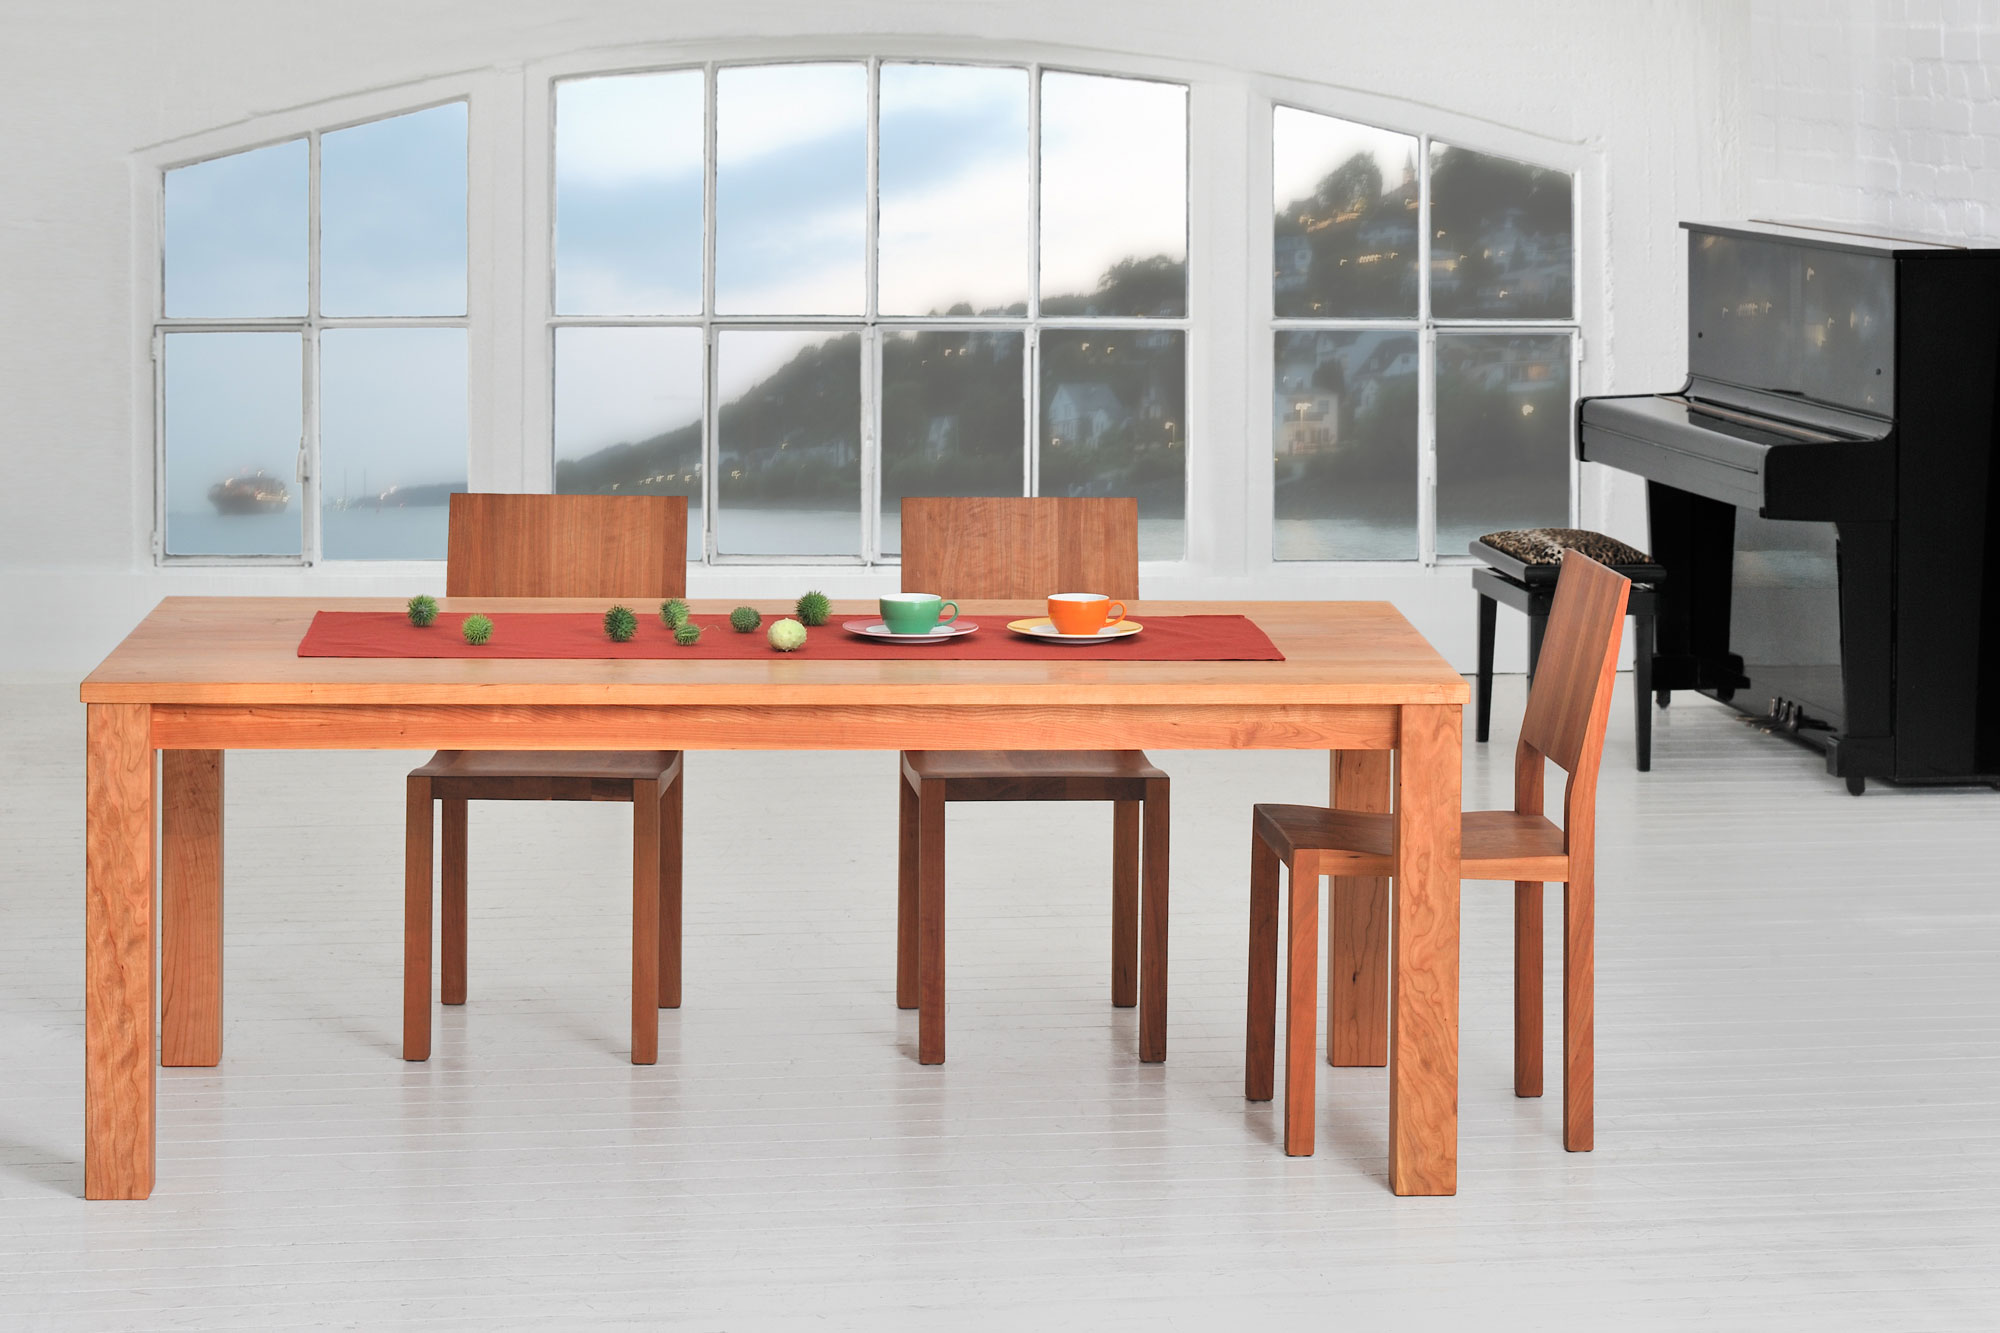 Tailor-Made Wood Table FORTE 3 B9X9 2001 custom made in solid wood by vitamin design